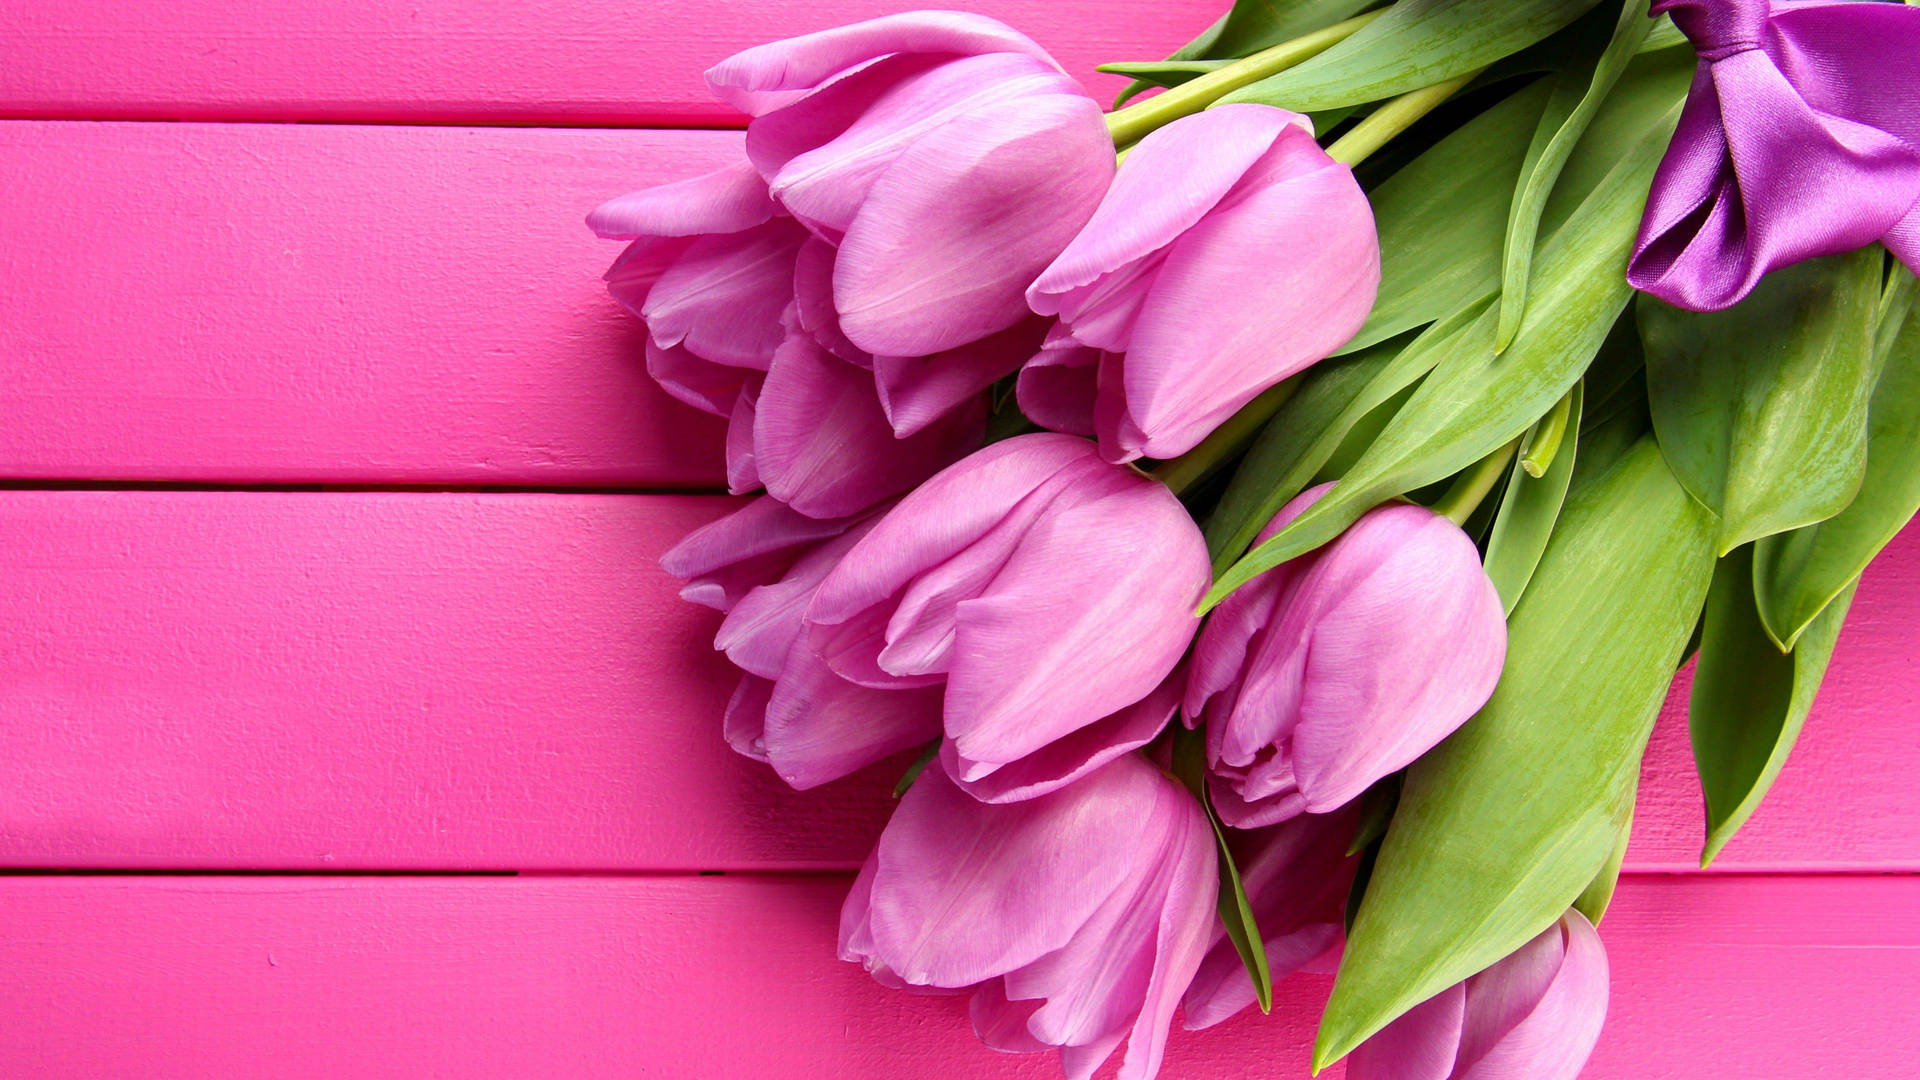 Cute Pink Flower Of Tulips On Plank Background